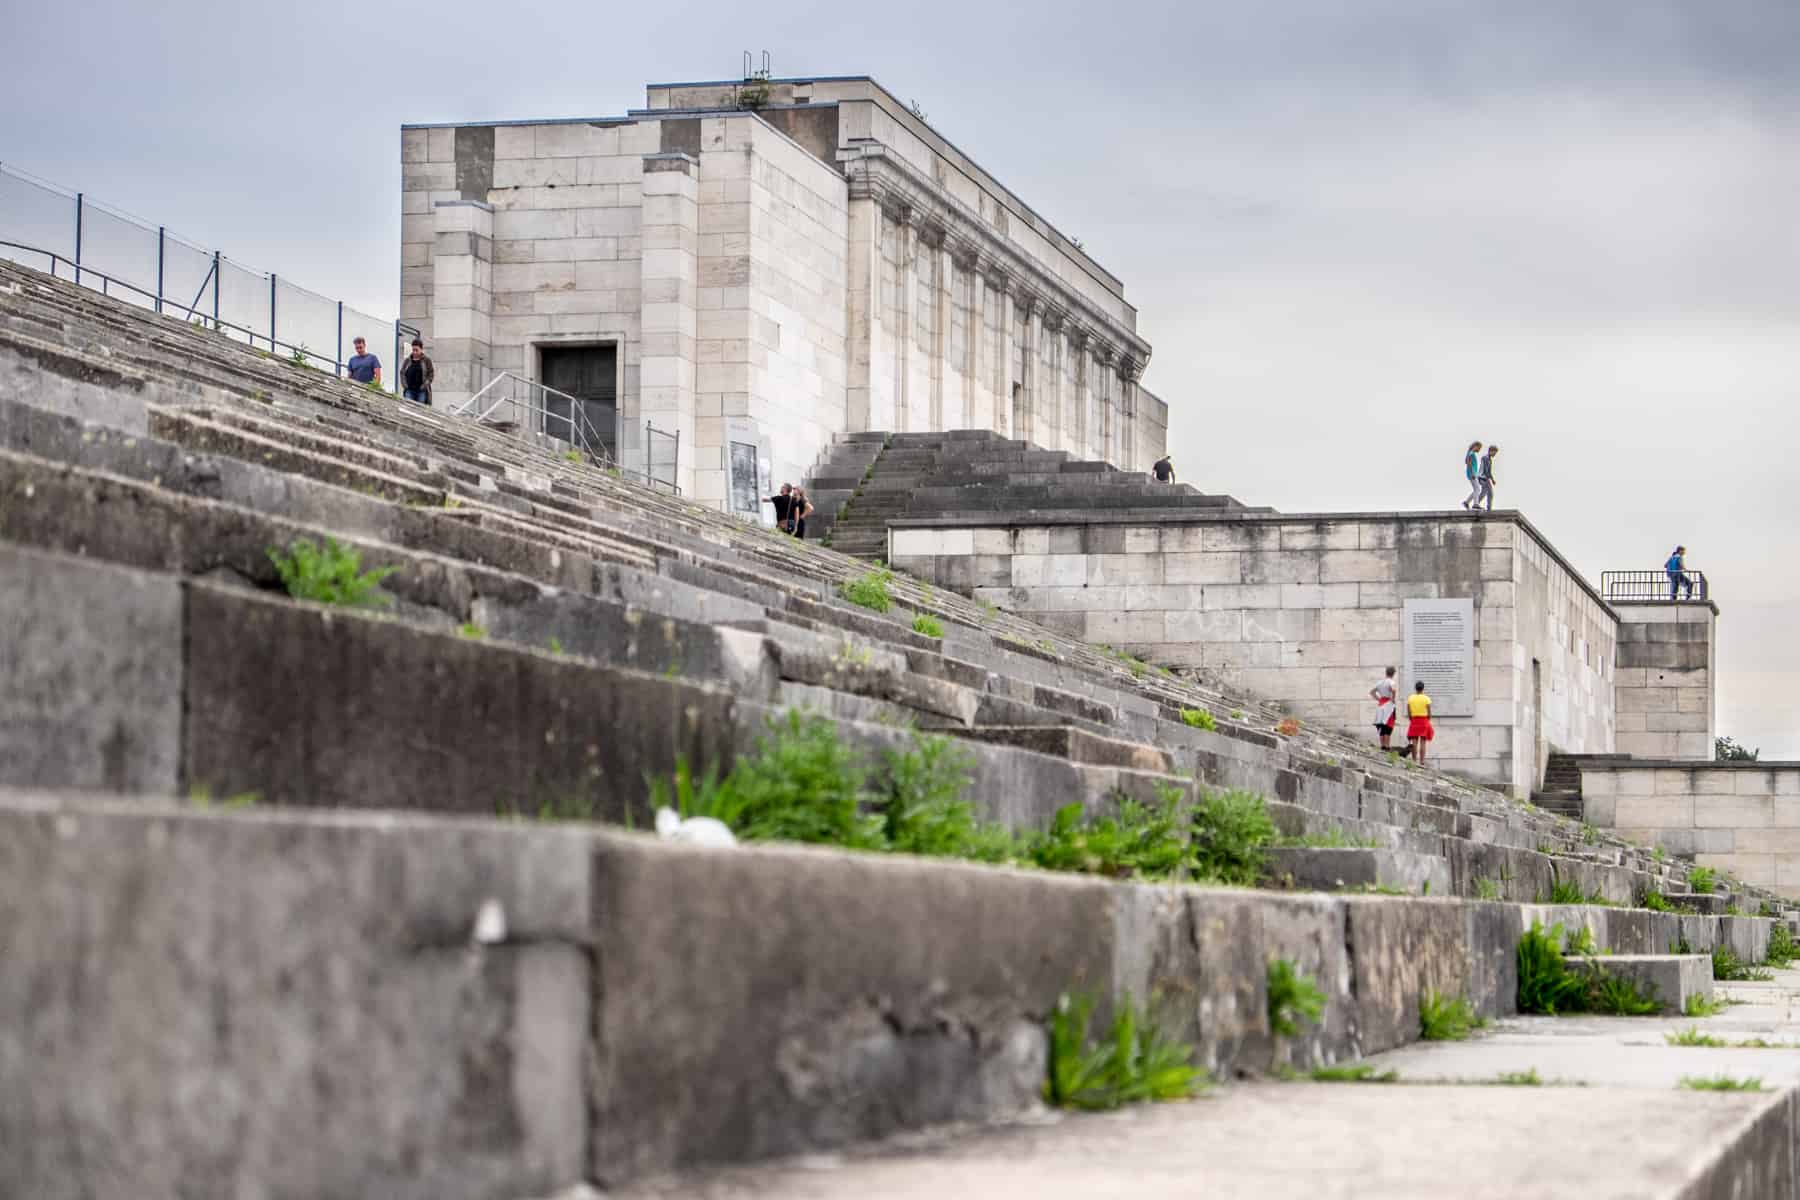 Close up view of the stone step terrace of the Zeppelin Field former Nazi Party Rally Grounds site in Nuremberg, Germany